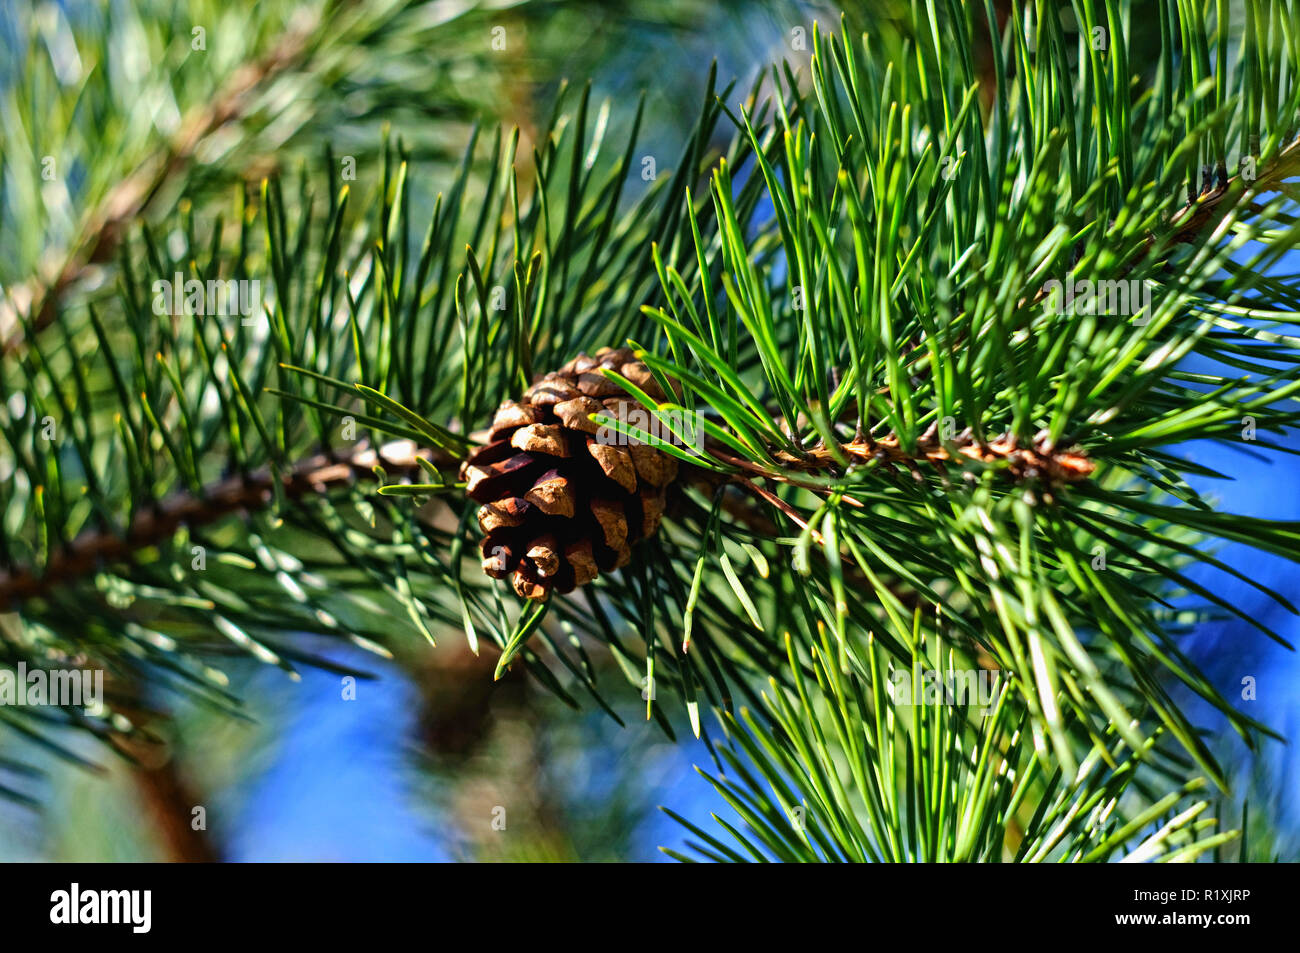 Colorful fresh green young pine branch with a cone close-up. Stock Photo